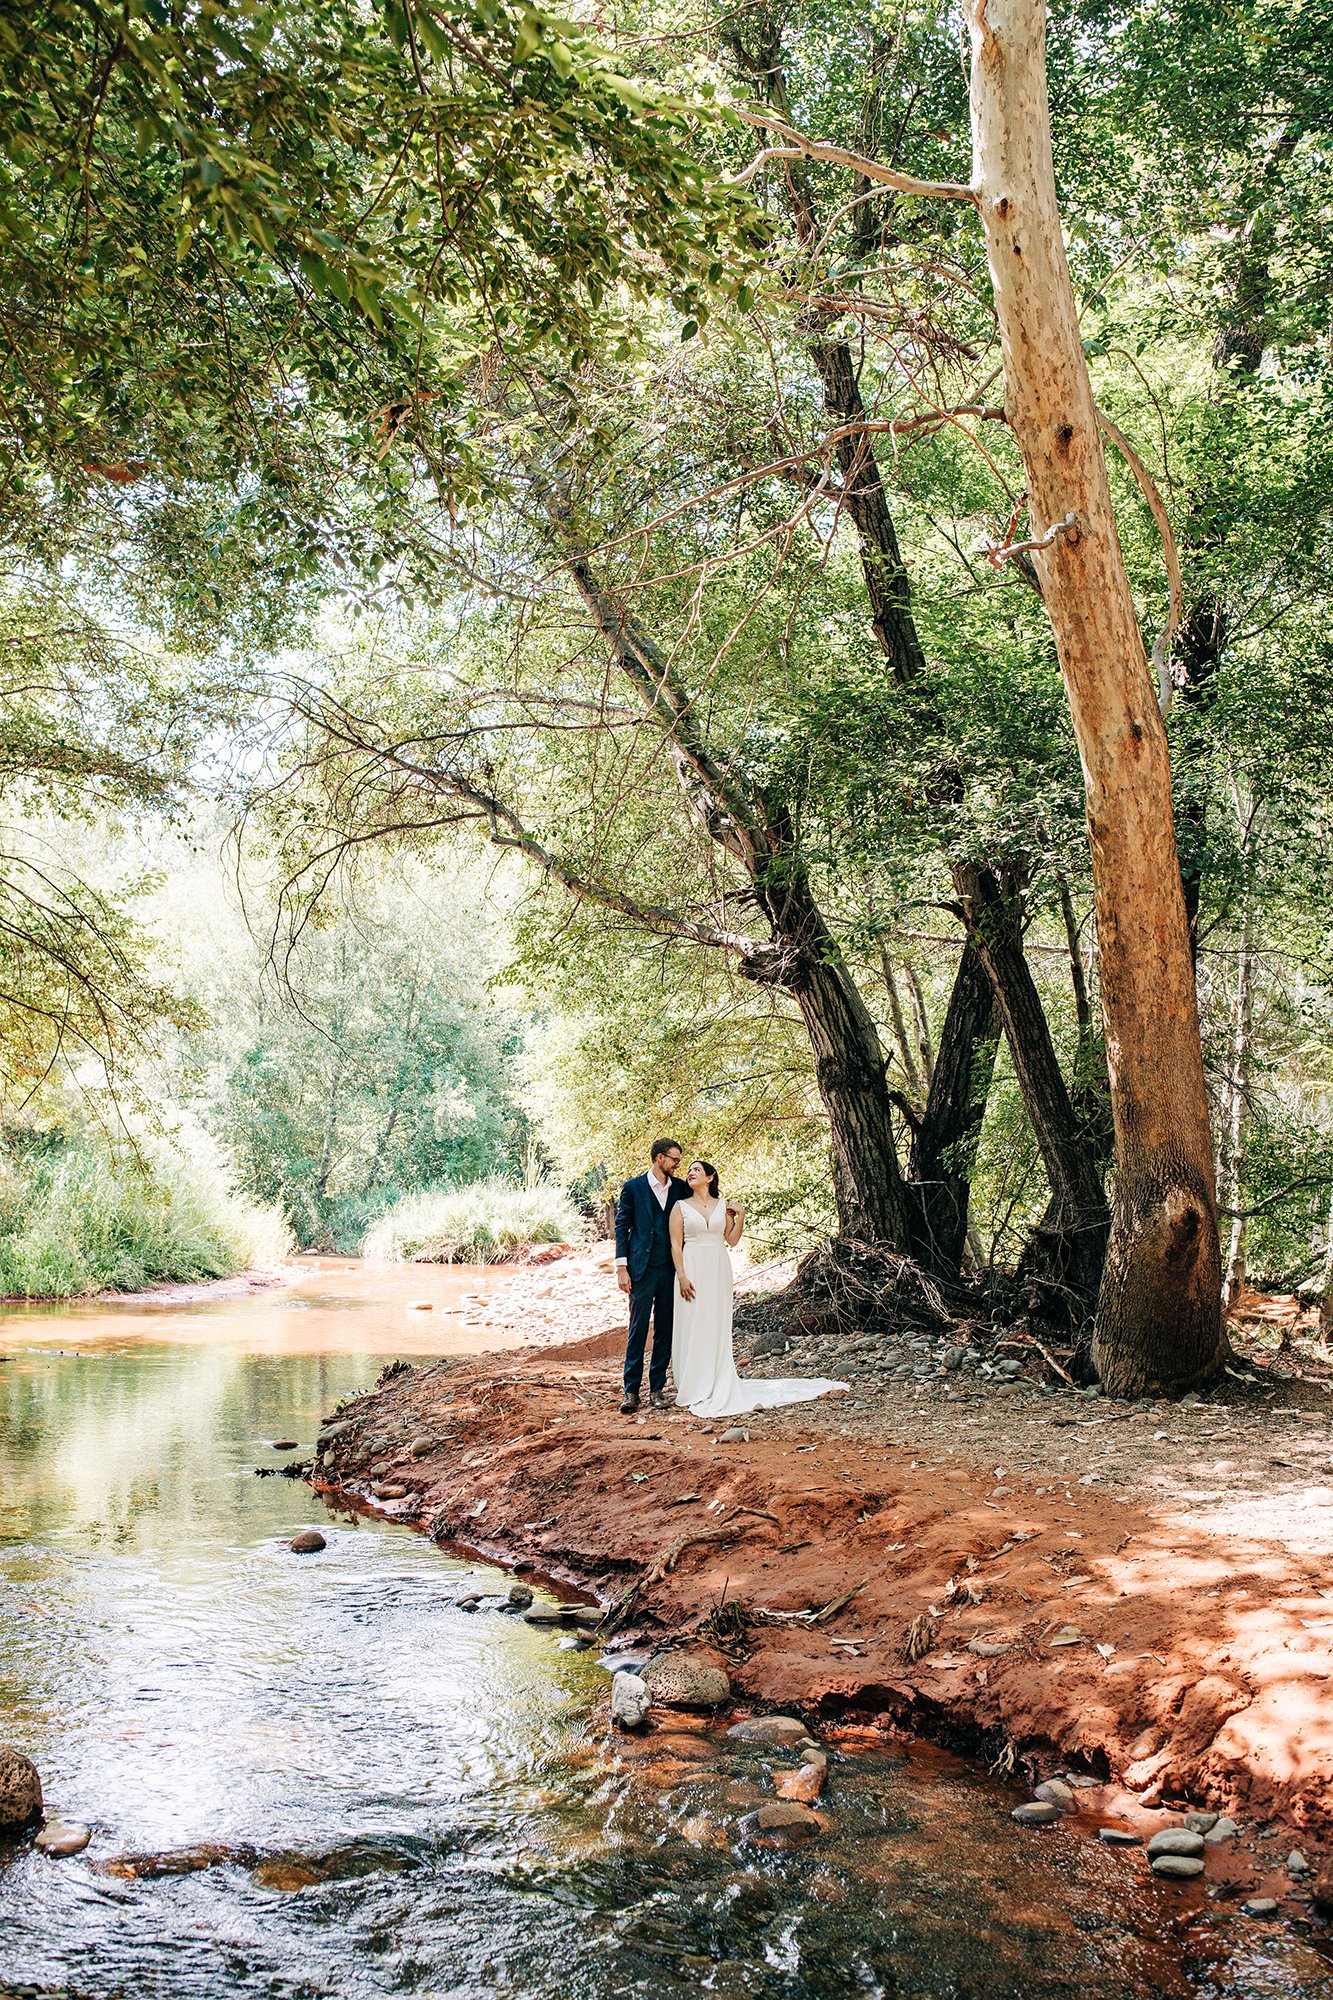 Stephanie and Matthew pose for their Sedona wedding photographer next to a lovely stream